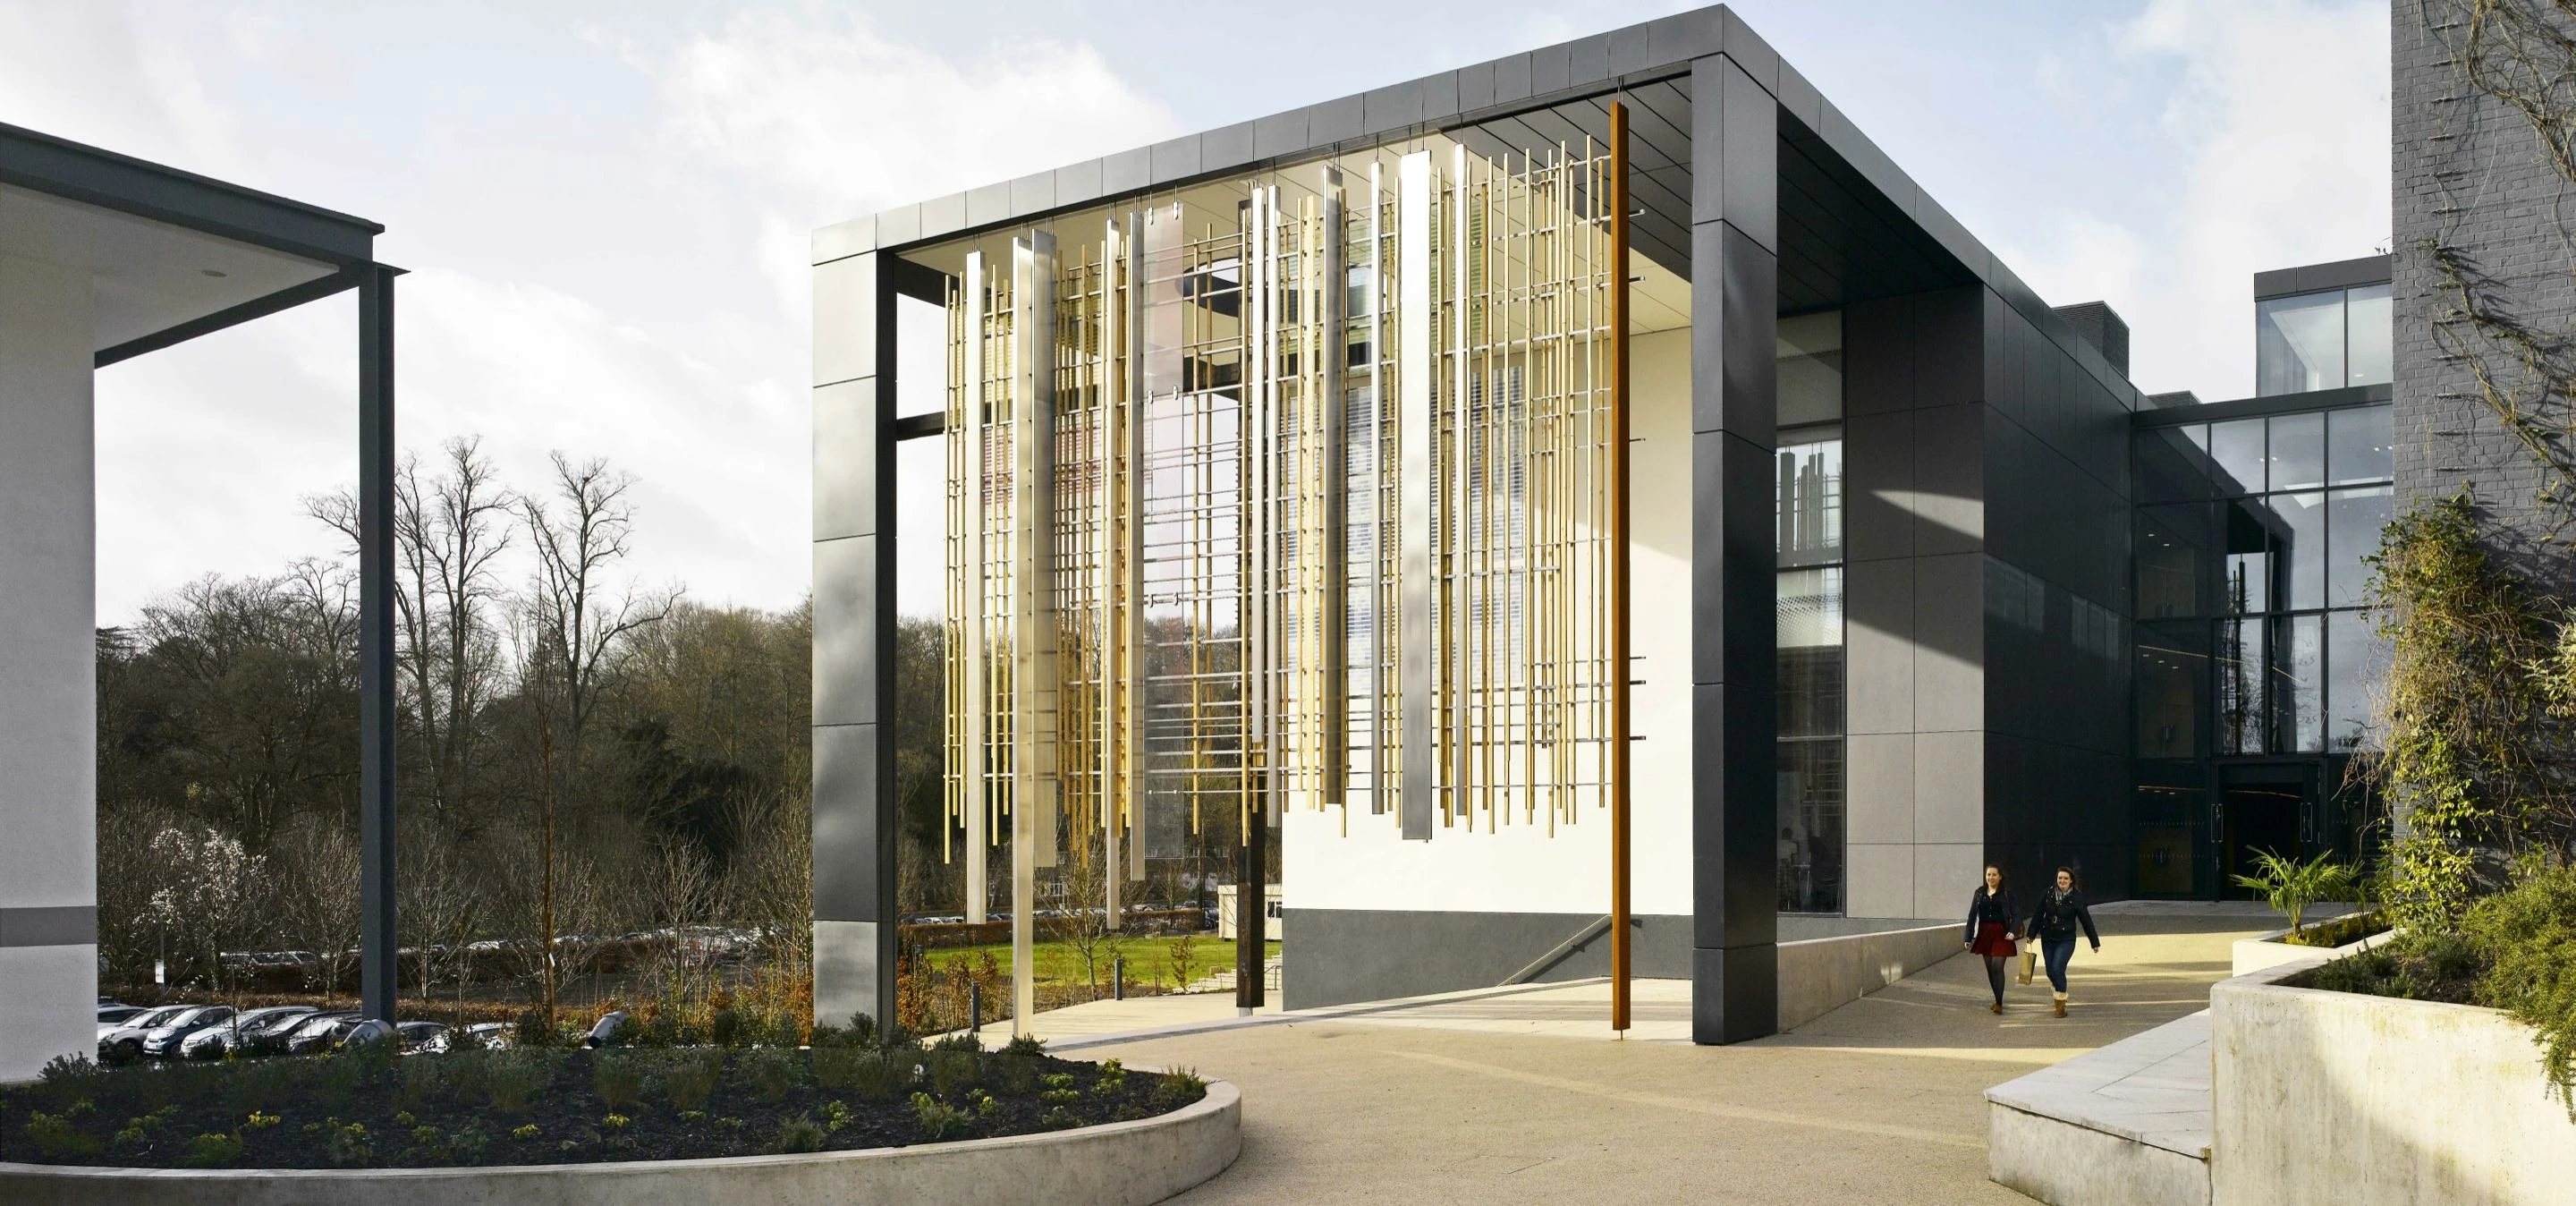 The St Alphege Learning & Teaching Building at the University of Winchester, one of the previous win